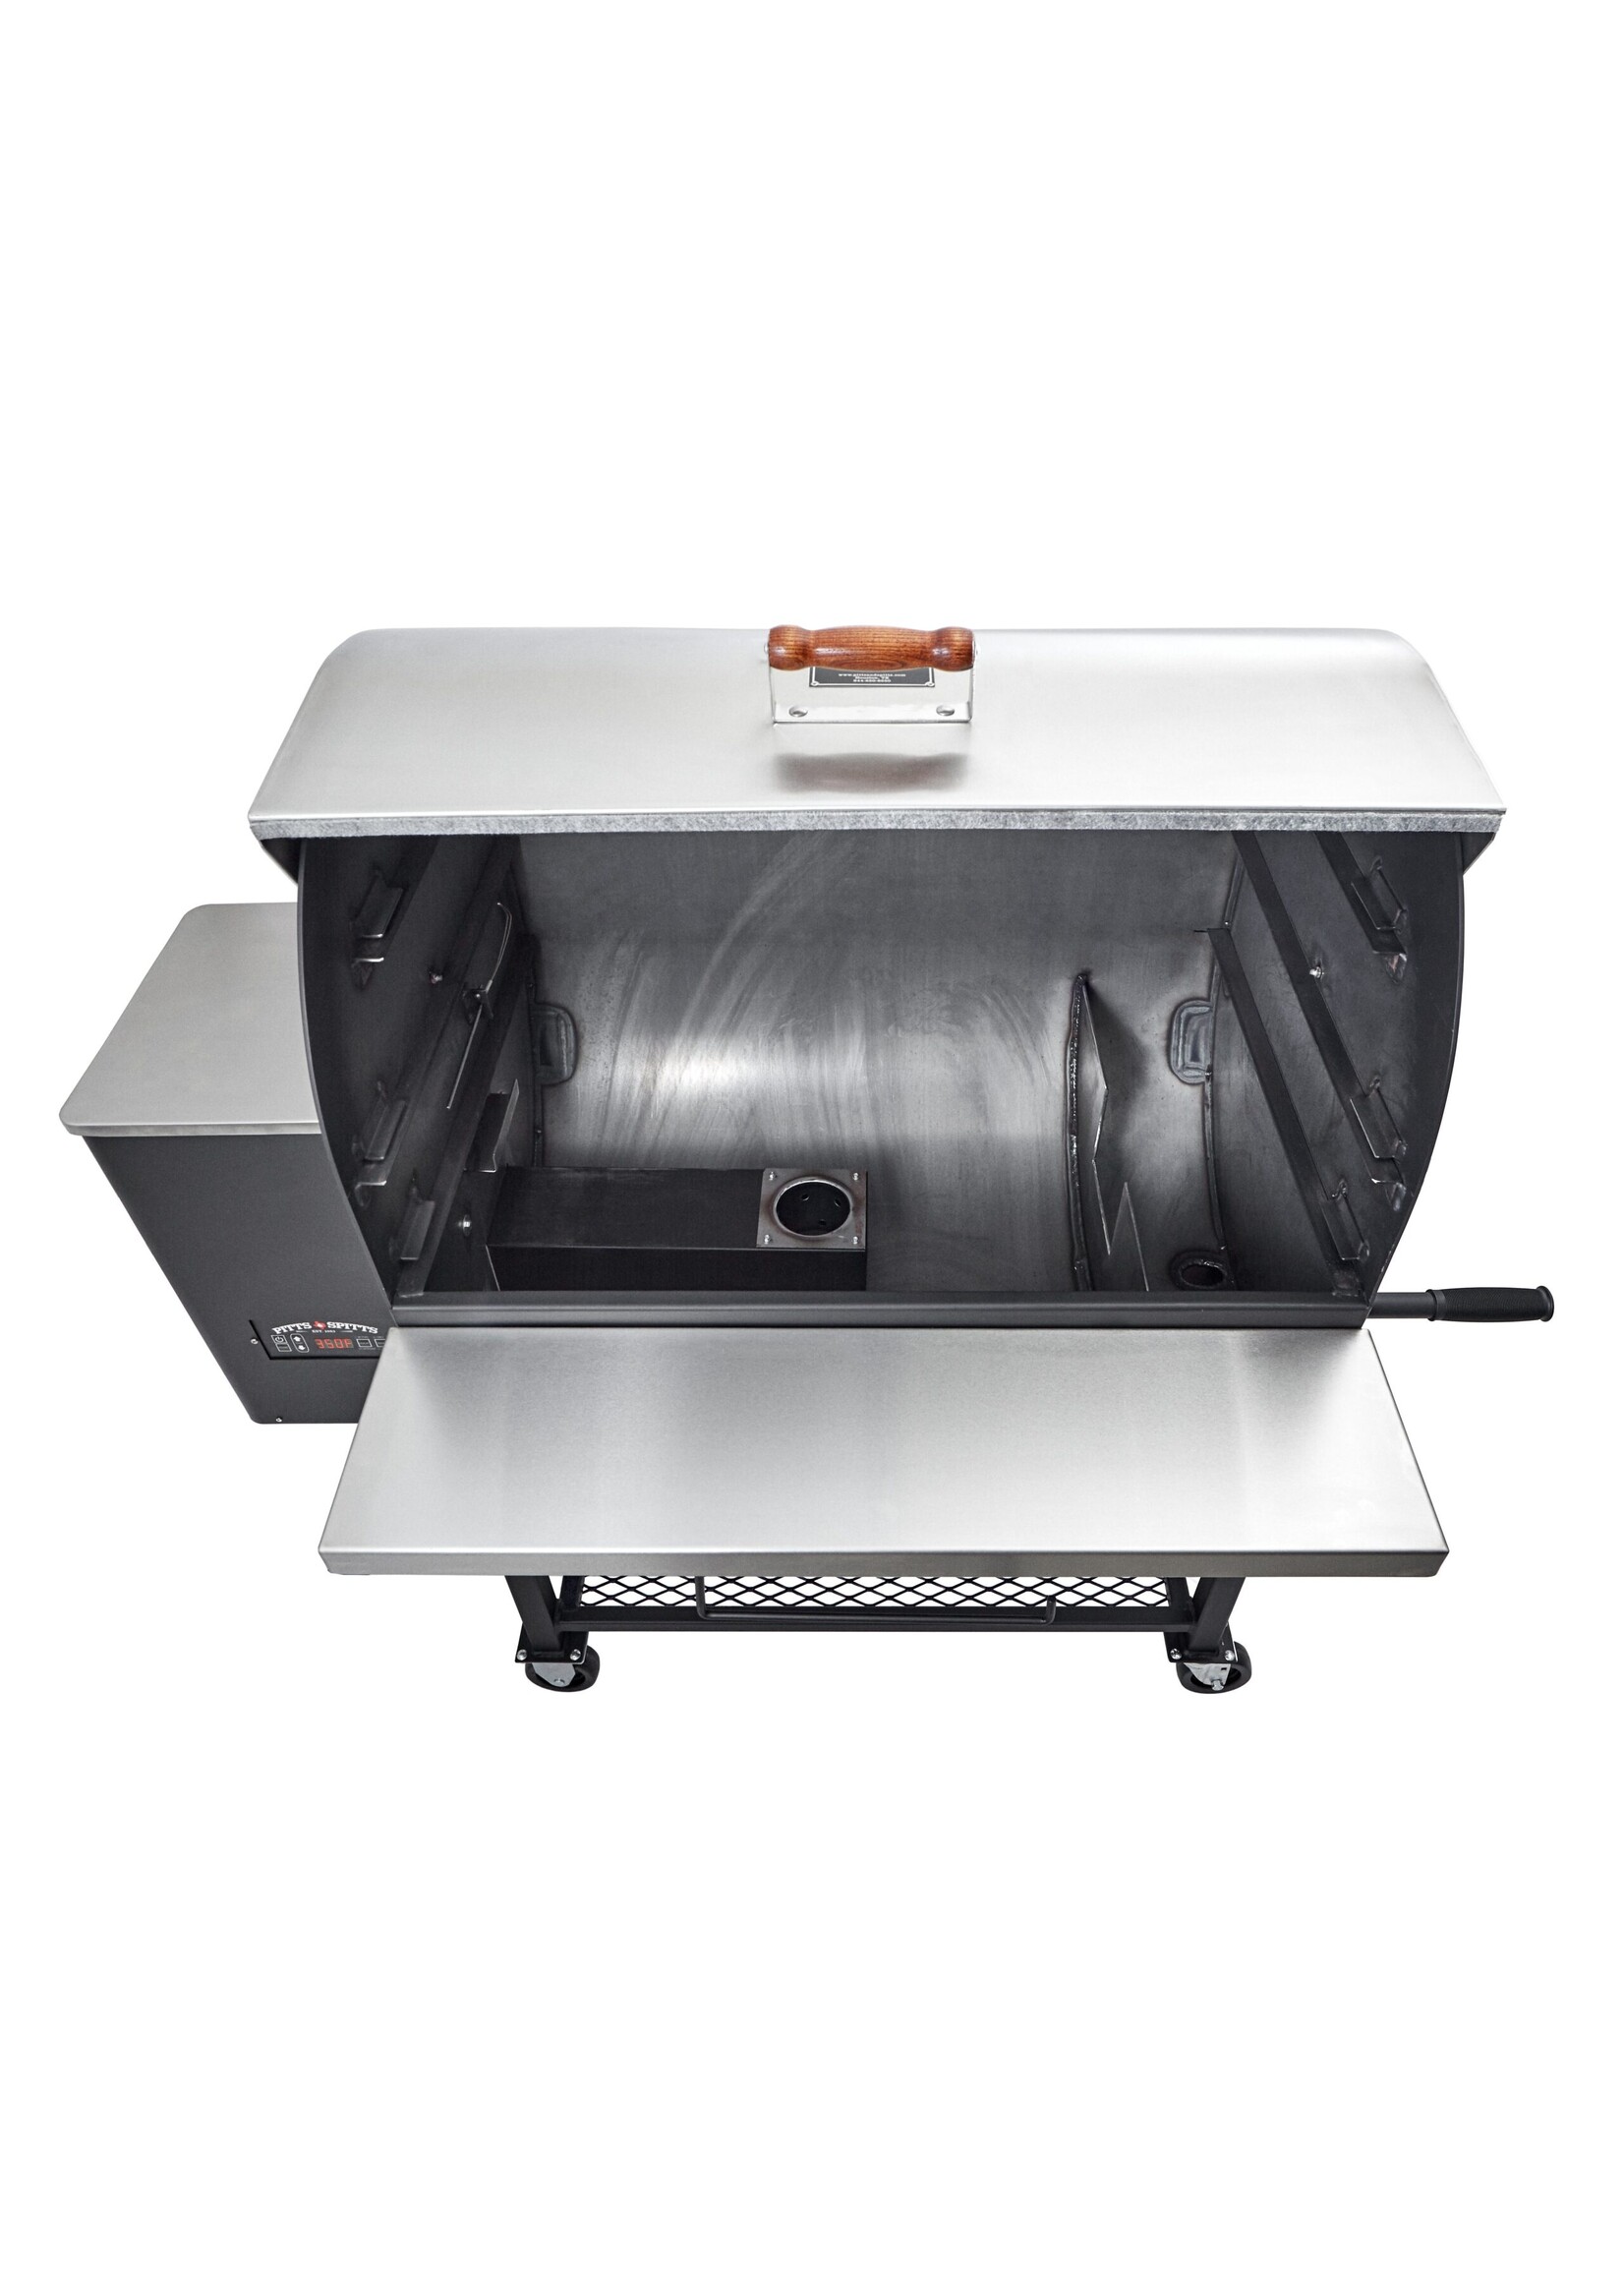 Pitts & Spitts Pitts & Spitts Maverick 2000 Pellet Grill w/ 8" Casters